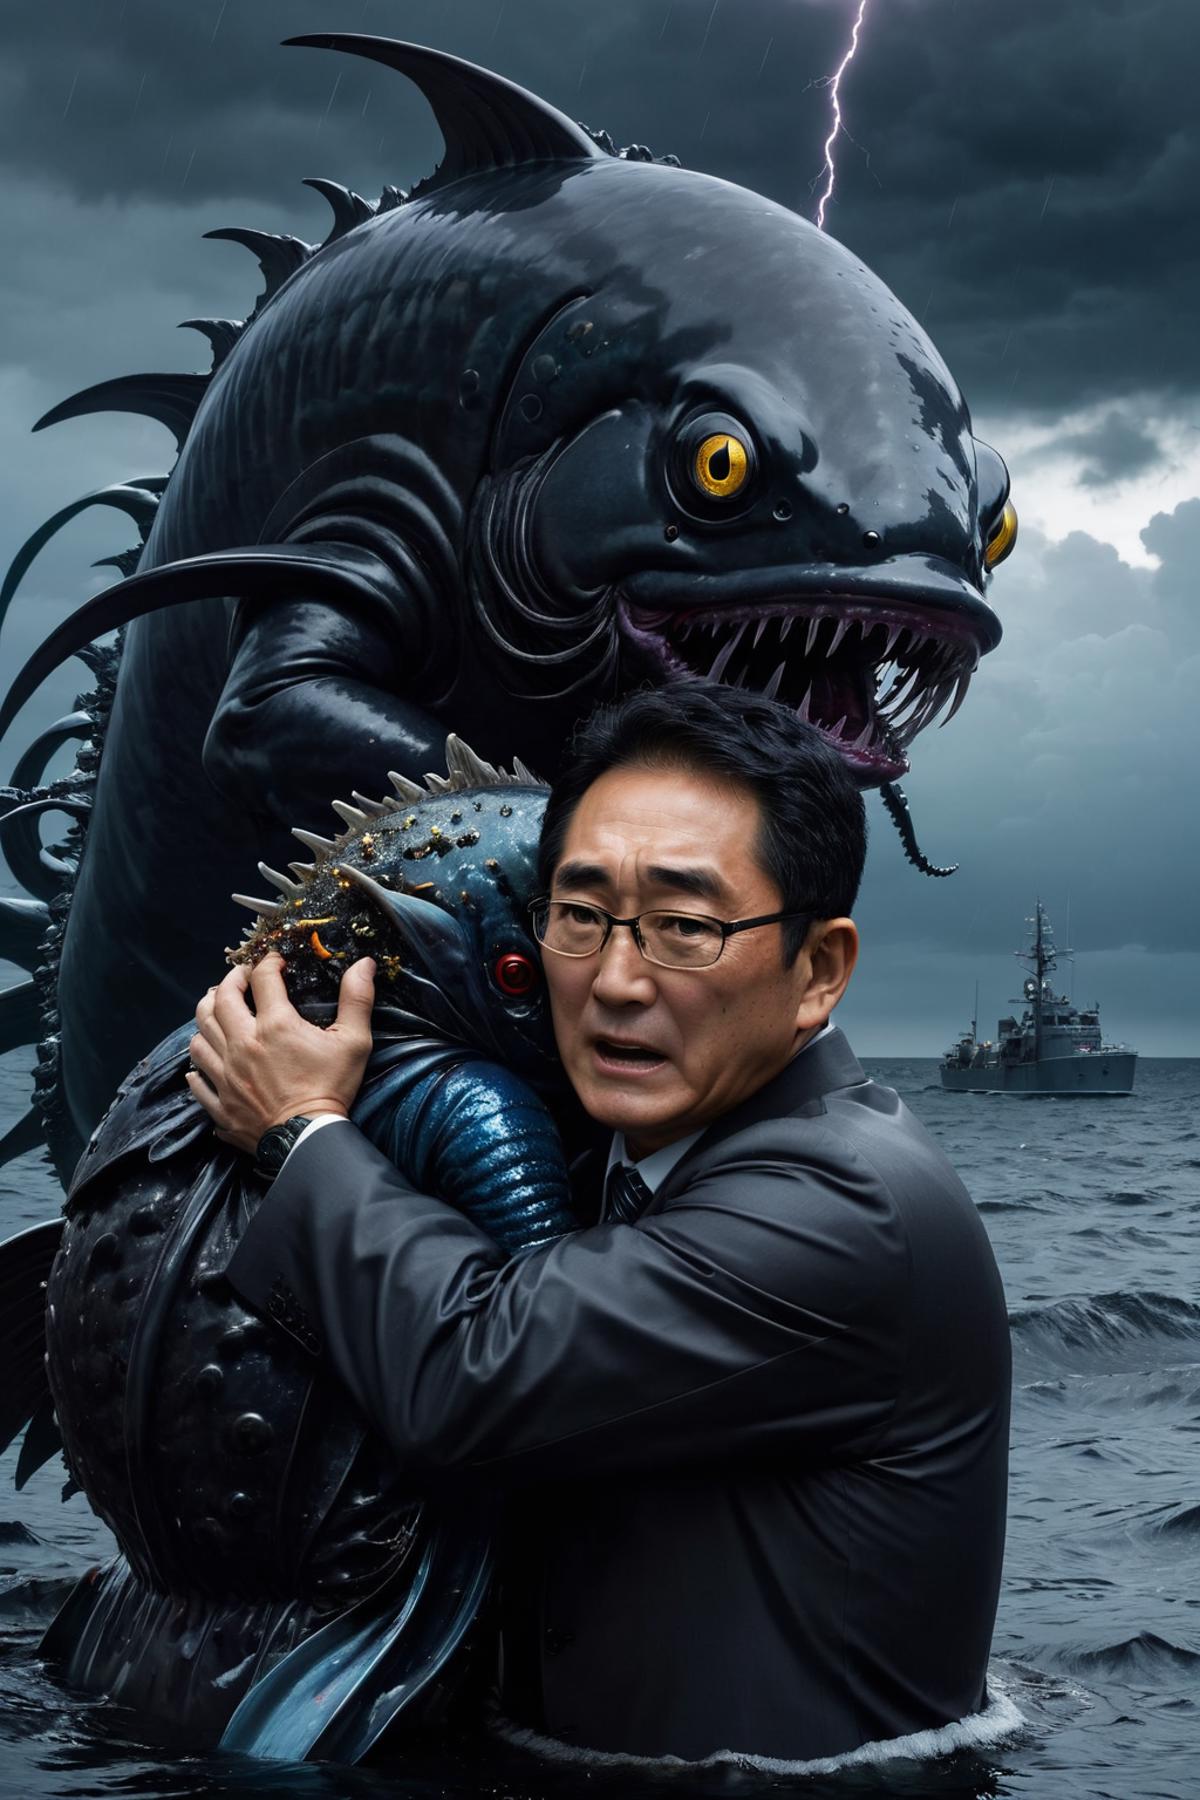 A man hugging a giant sea monster.